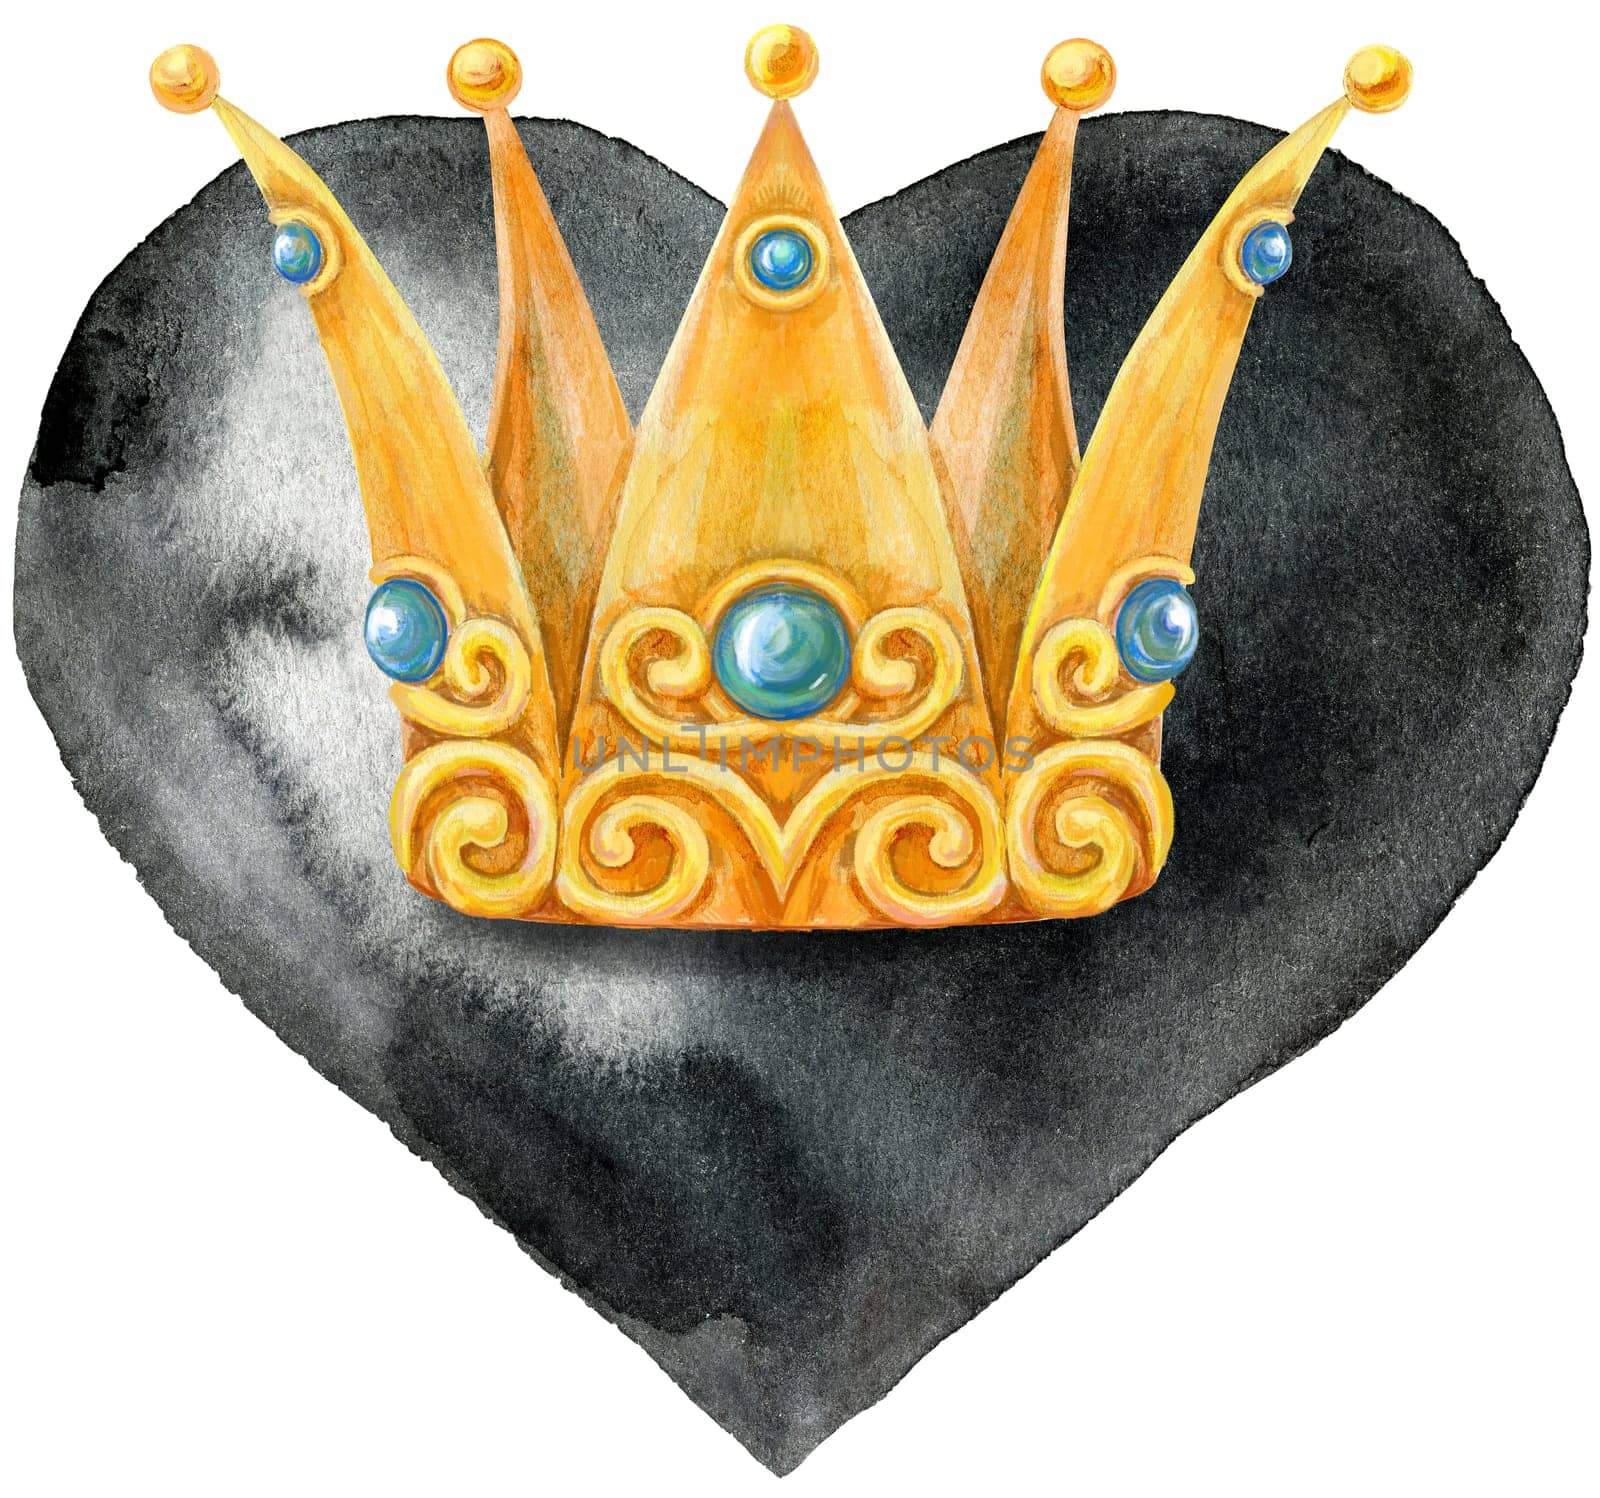 Watercolor black heart with golden crown by NataOmsk